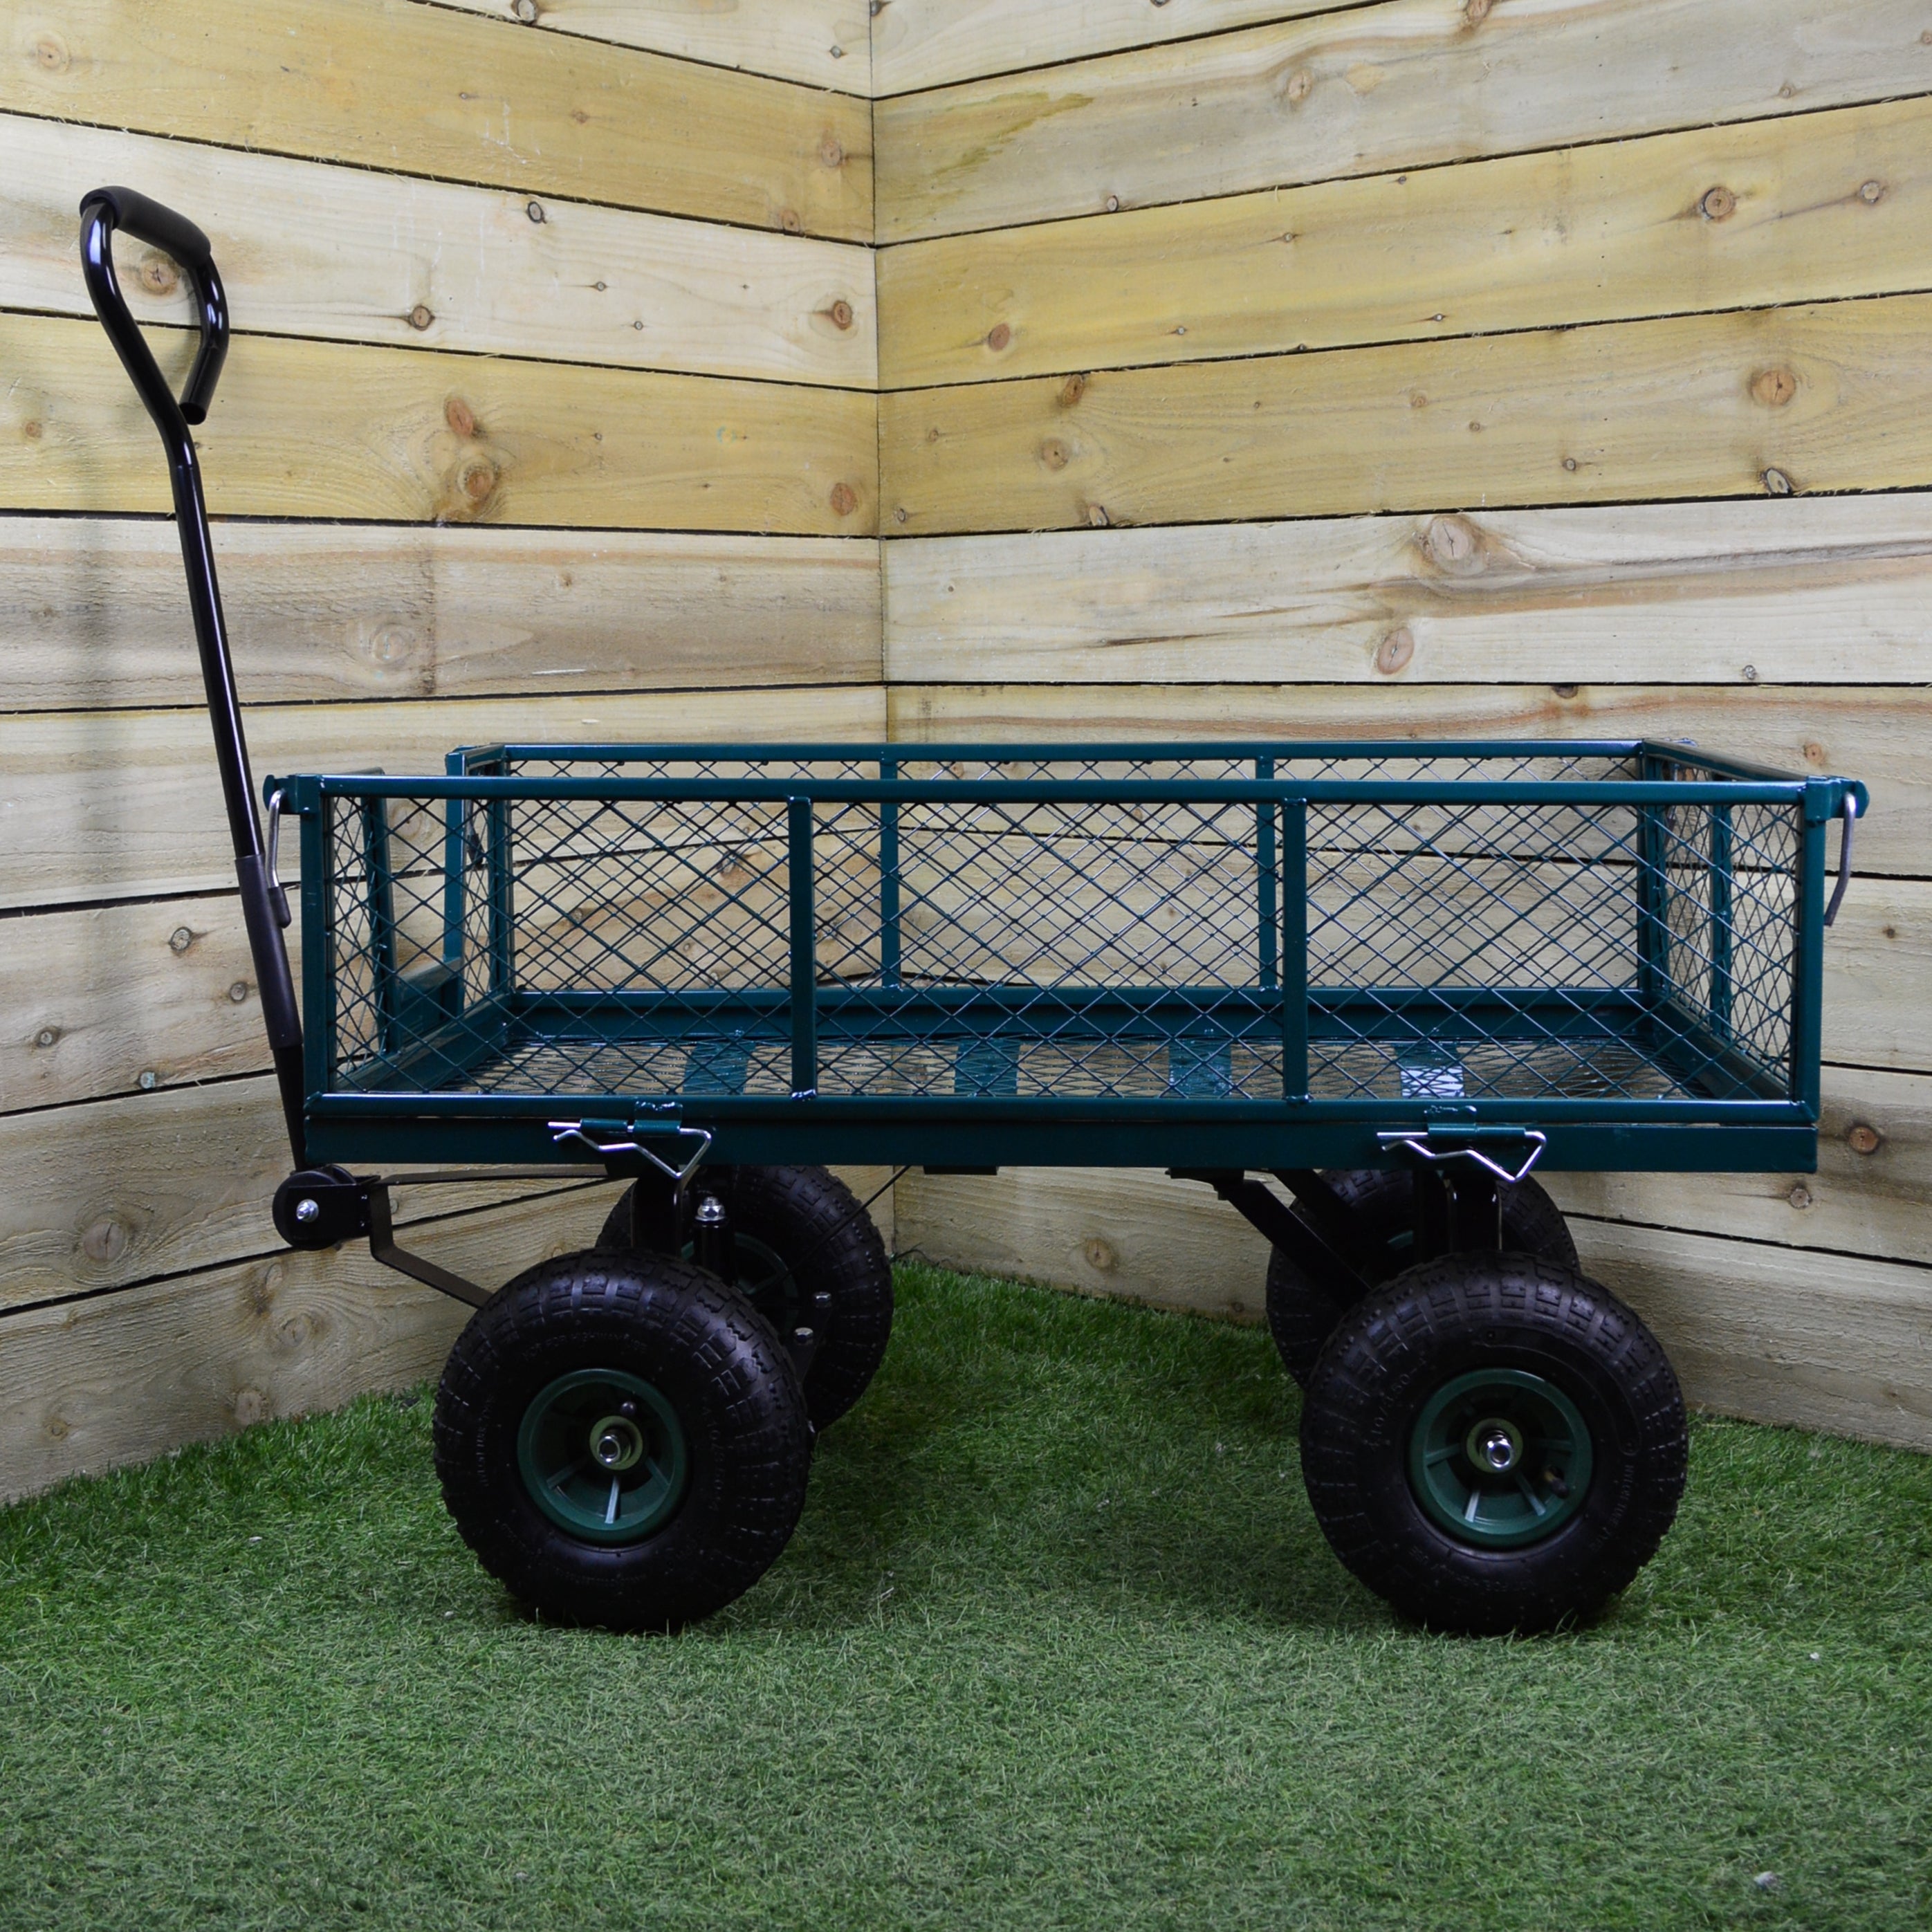 37" x 20" 4 Wheel Garden Utility Cart / Truck Trolley for up to 400kg